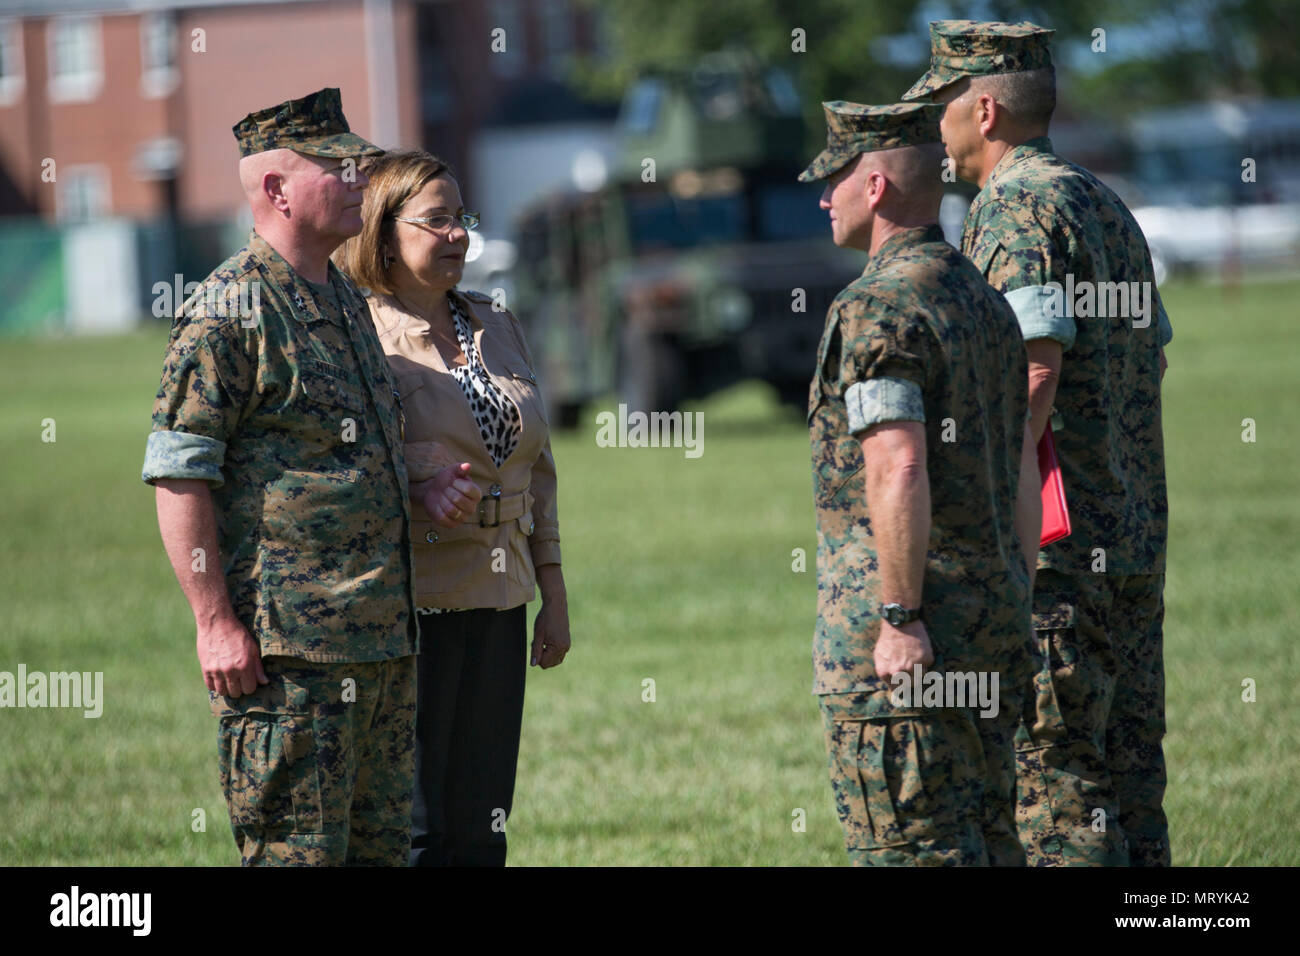 U.S. Marine Corps Maj. Gen. Walter L. Miller's wife, Mrs. Marcela Davila about to receive recognition from Lt. Gen. Michael G. Dana, deputy commandant for installations and logistics, during a change of command ceremony on Camp Lejeune, N.C., July 14, 2017. During the ceremony, Miller relinquished his command as commanding general of II MEF to Lt. Gen. Robert F. Hedelund. (U.S. Marine Corps photo by Lance Cpl. Koby I. Saunders) Stock Photo